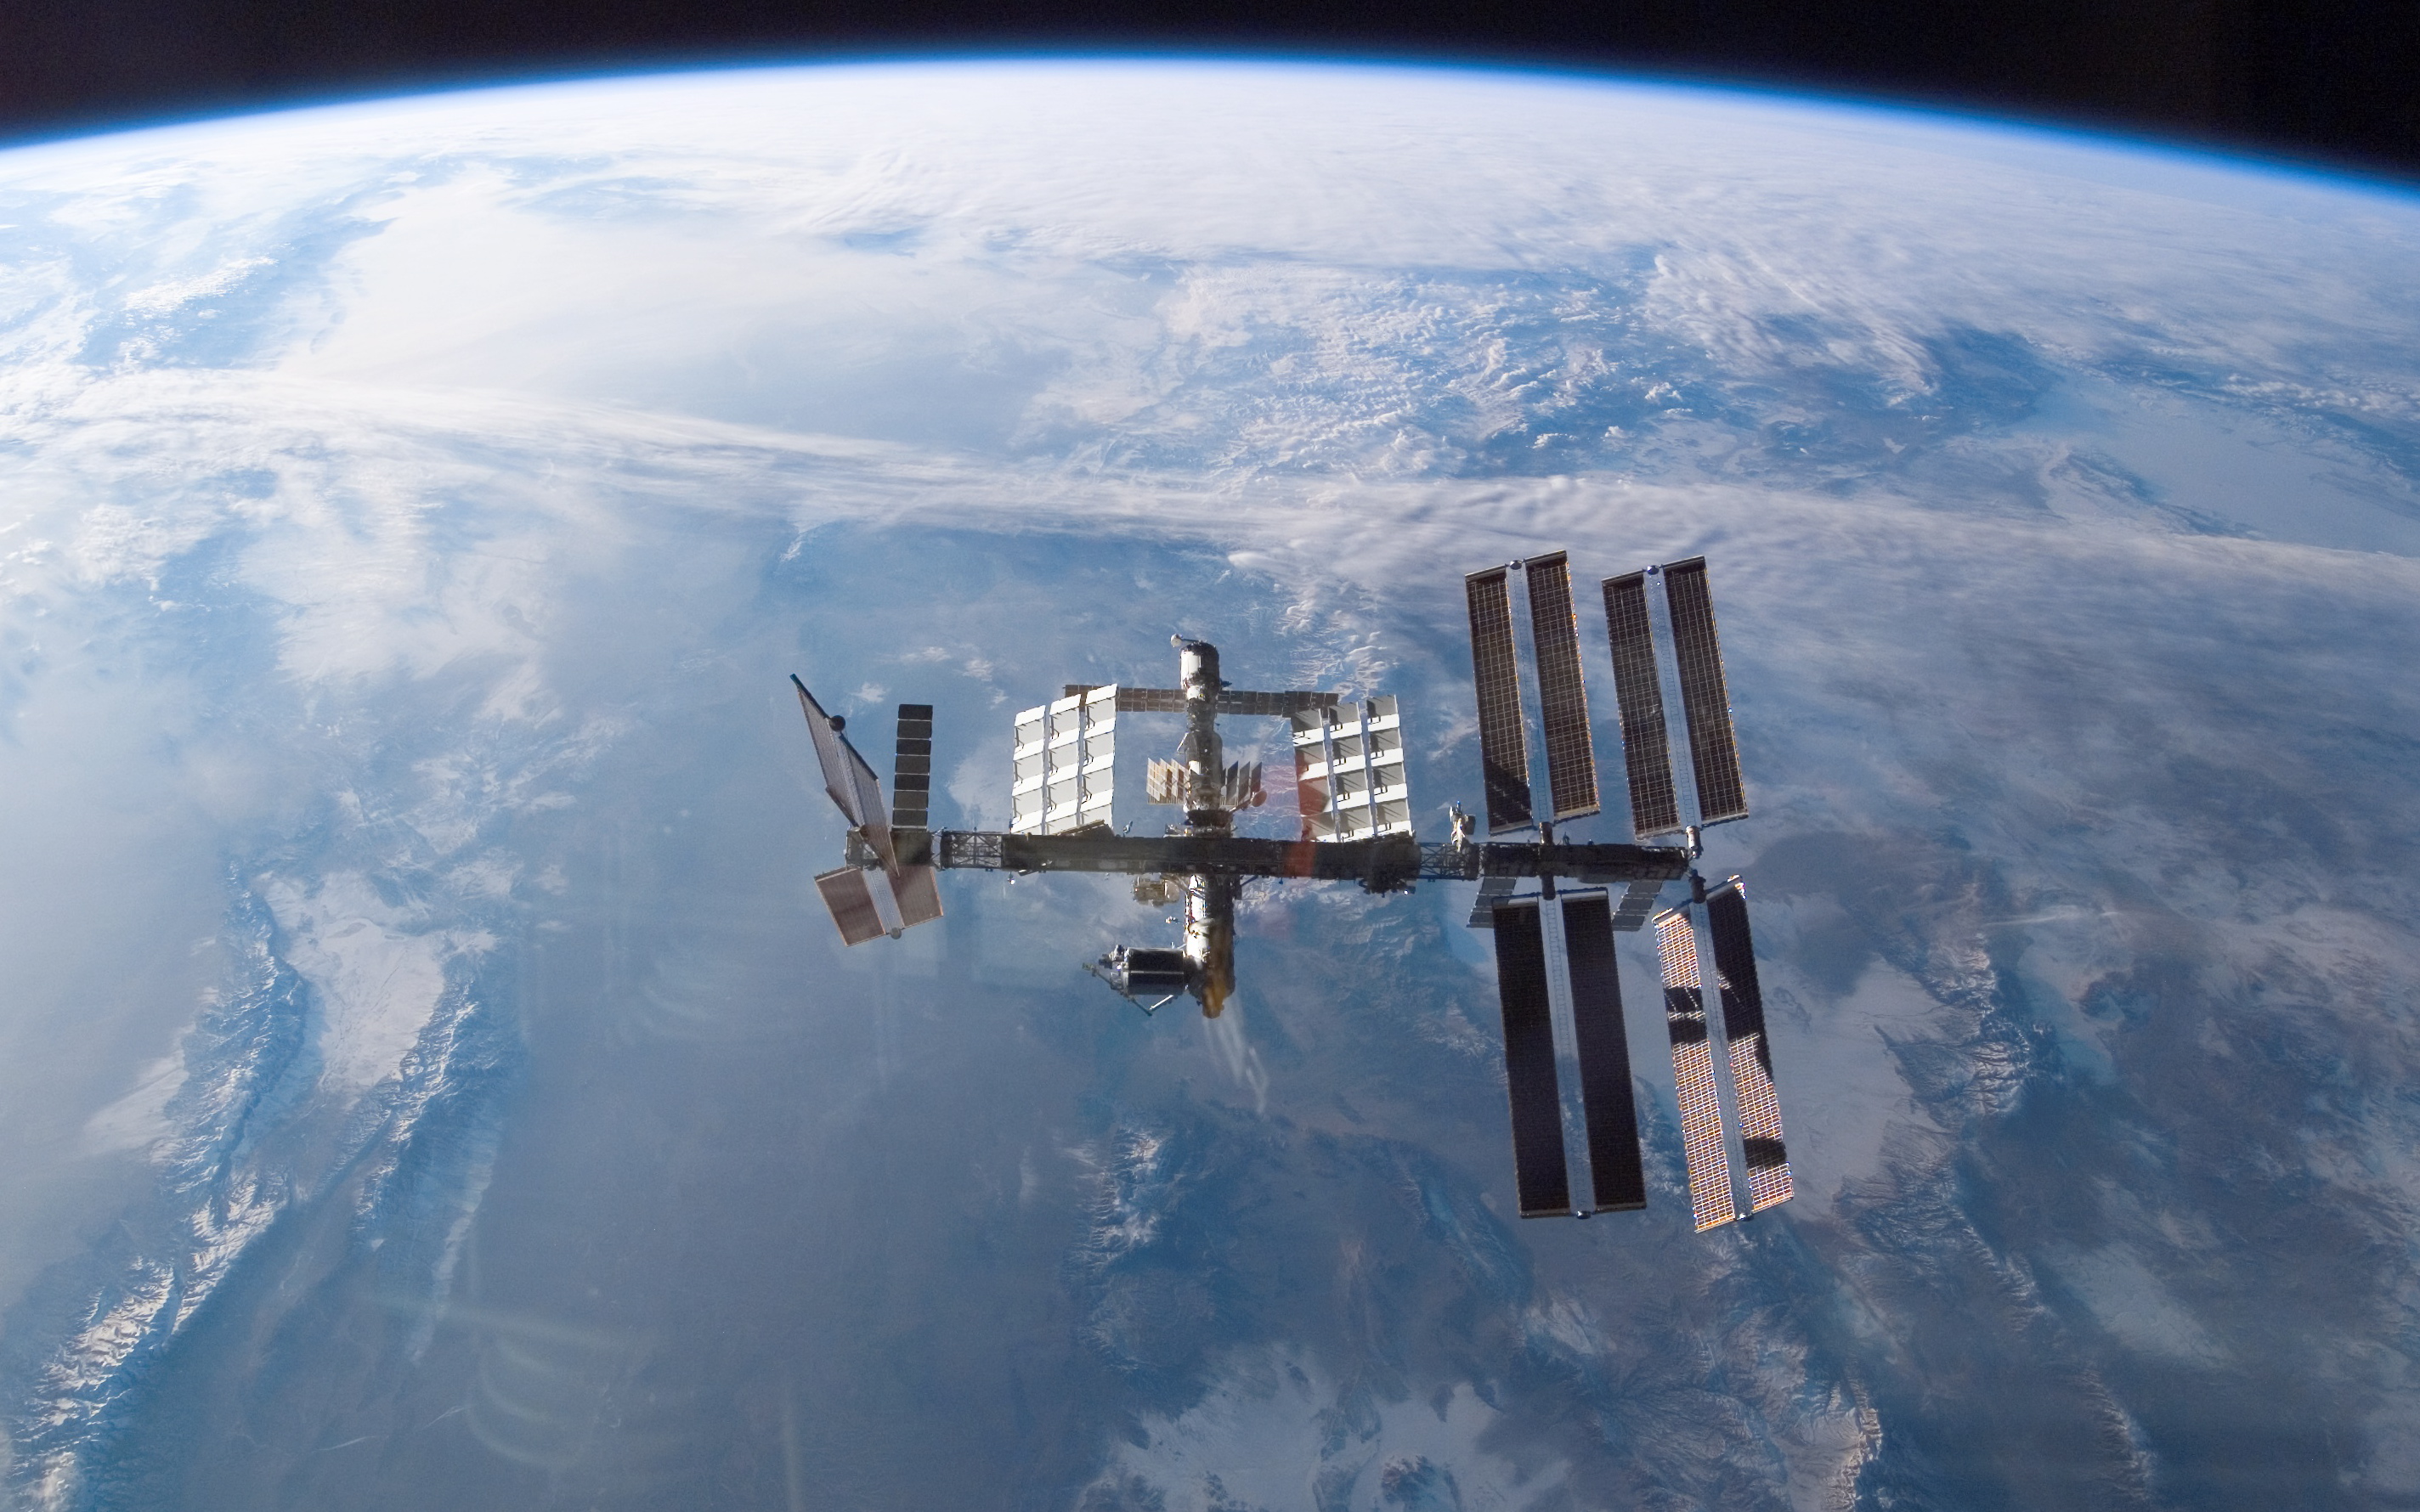 An external view of the International Space Station above Earth.